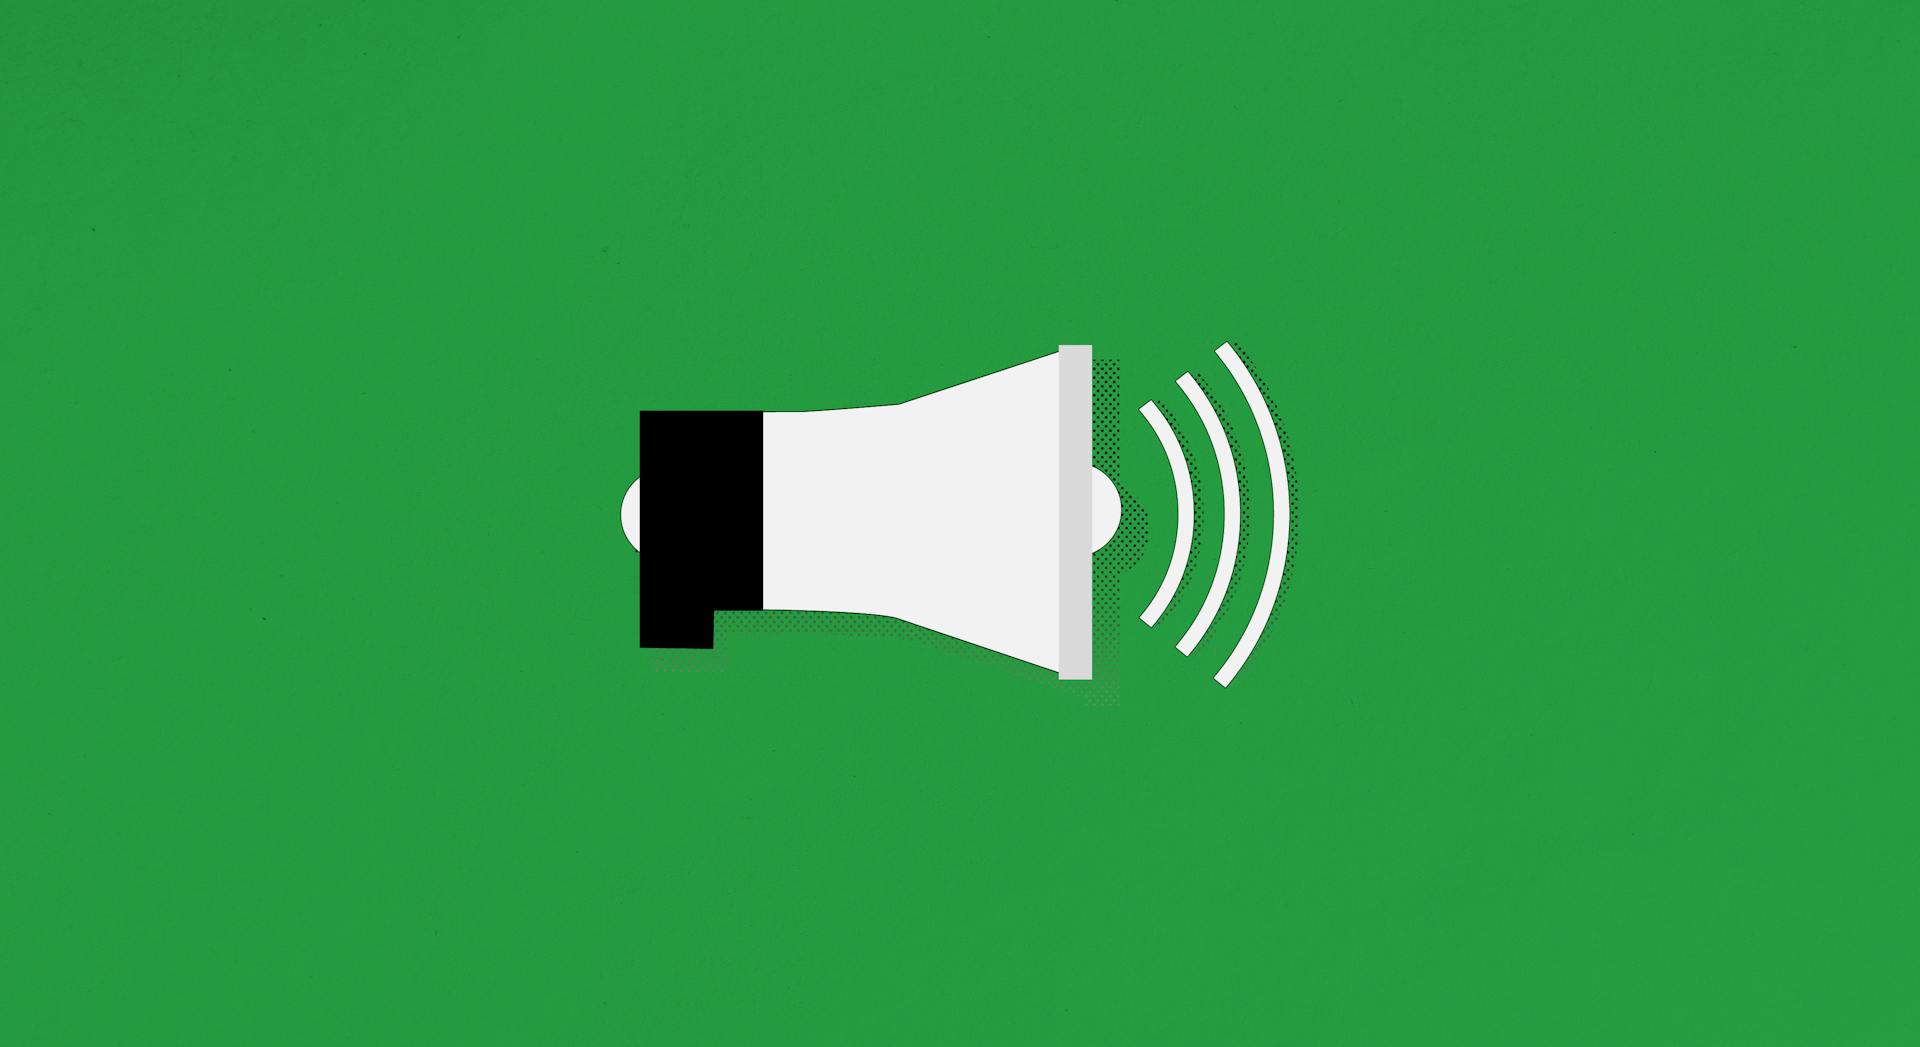 A megaphone on a green background with an indication of sound